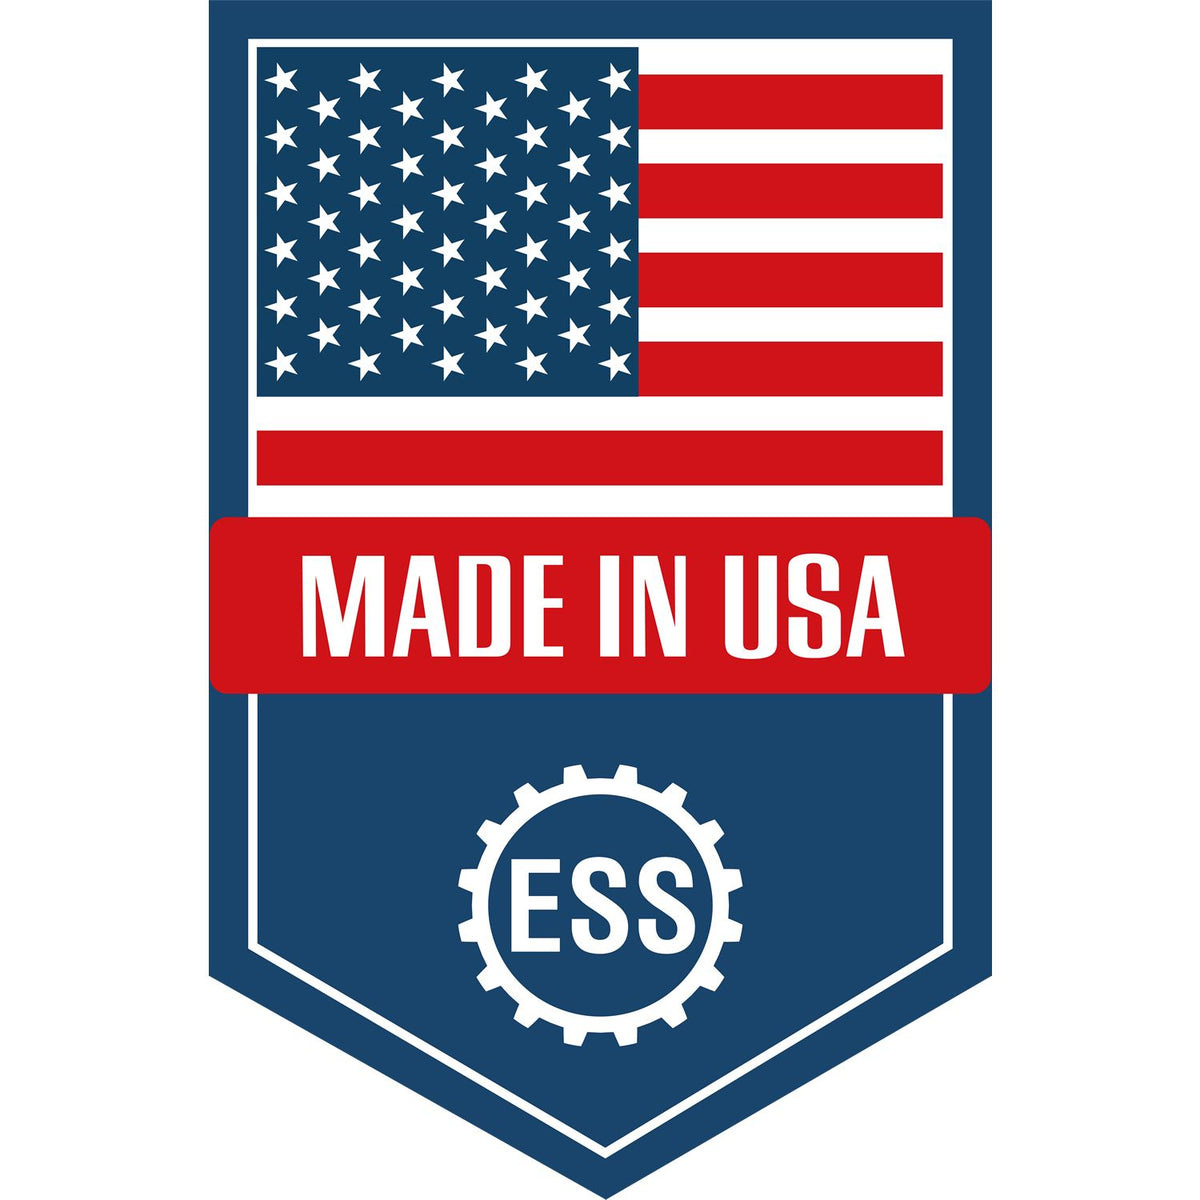 An icon or graphic with an american flag and text reading Made in USA for the Soft North Dakota Professional Geologist Seal